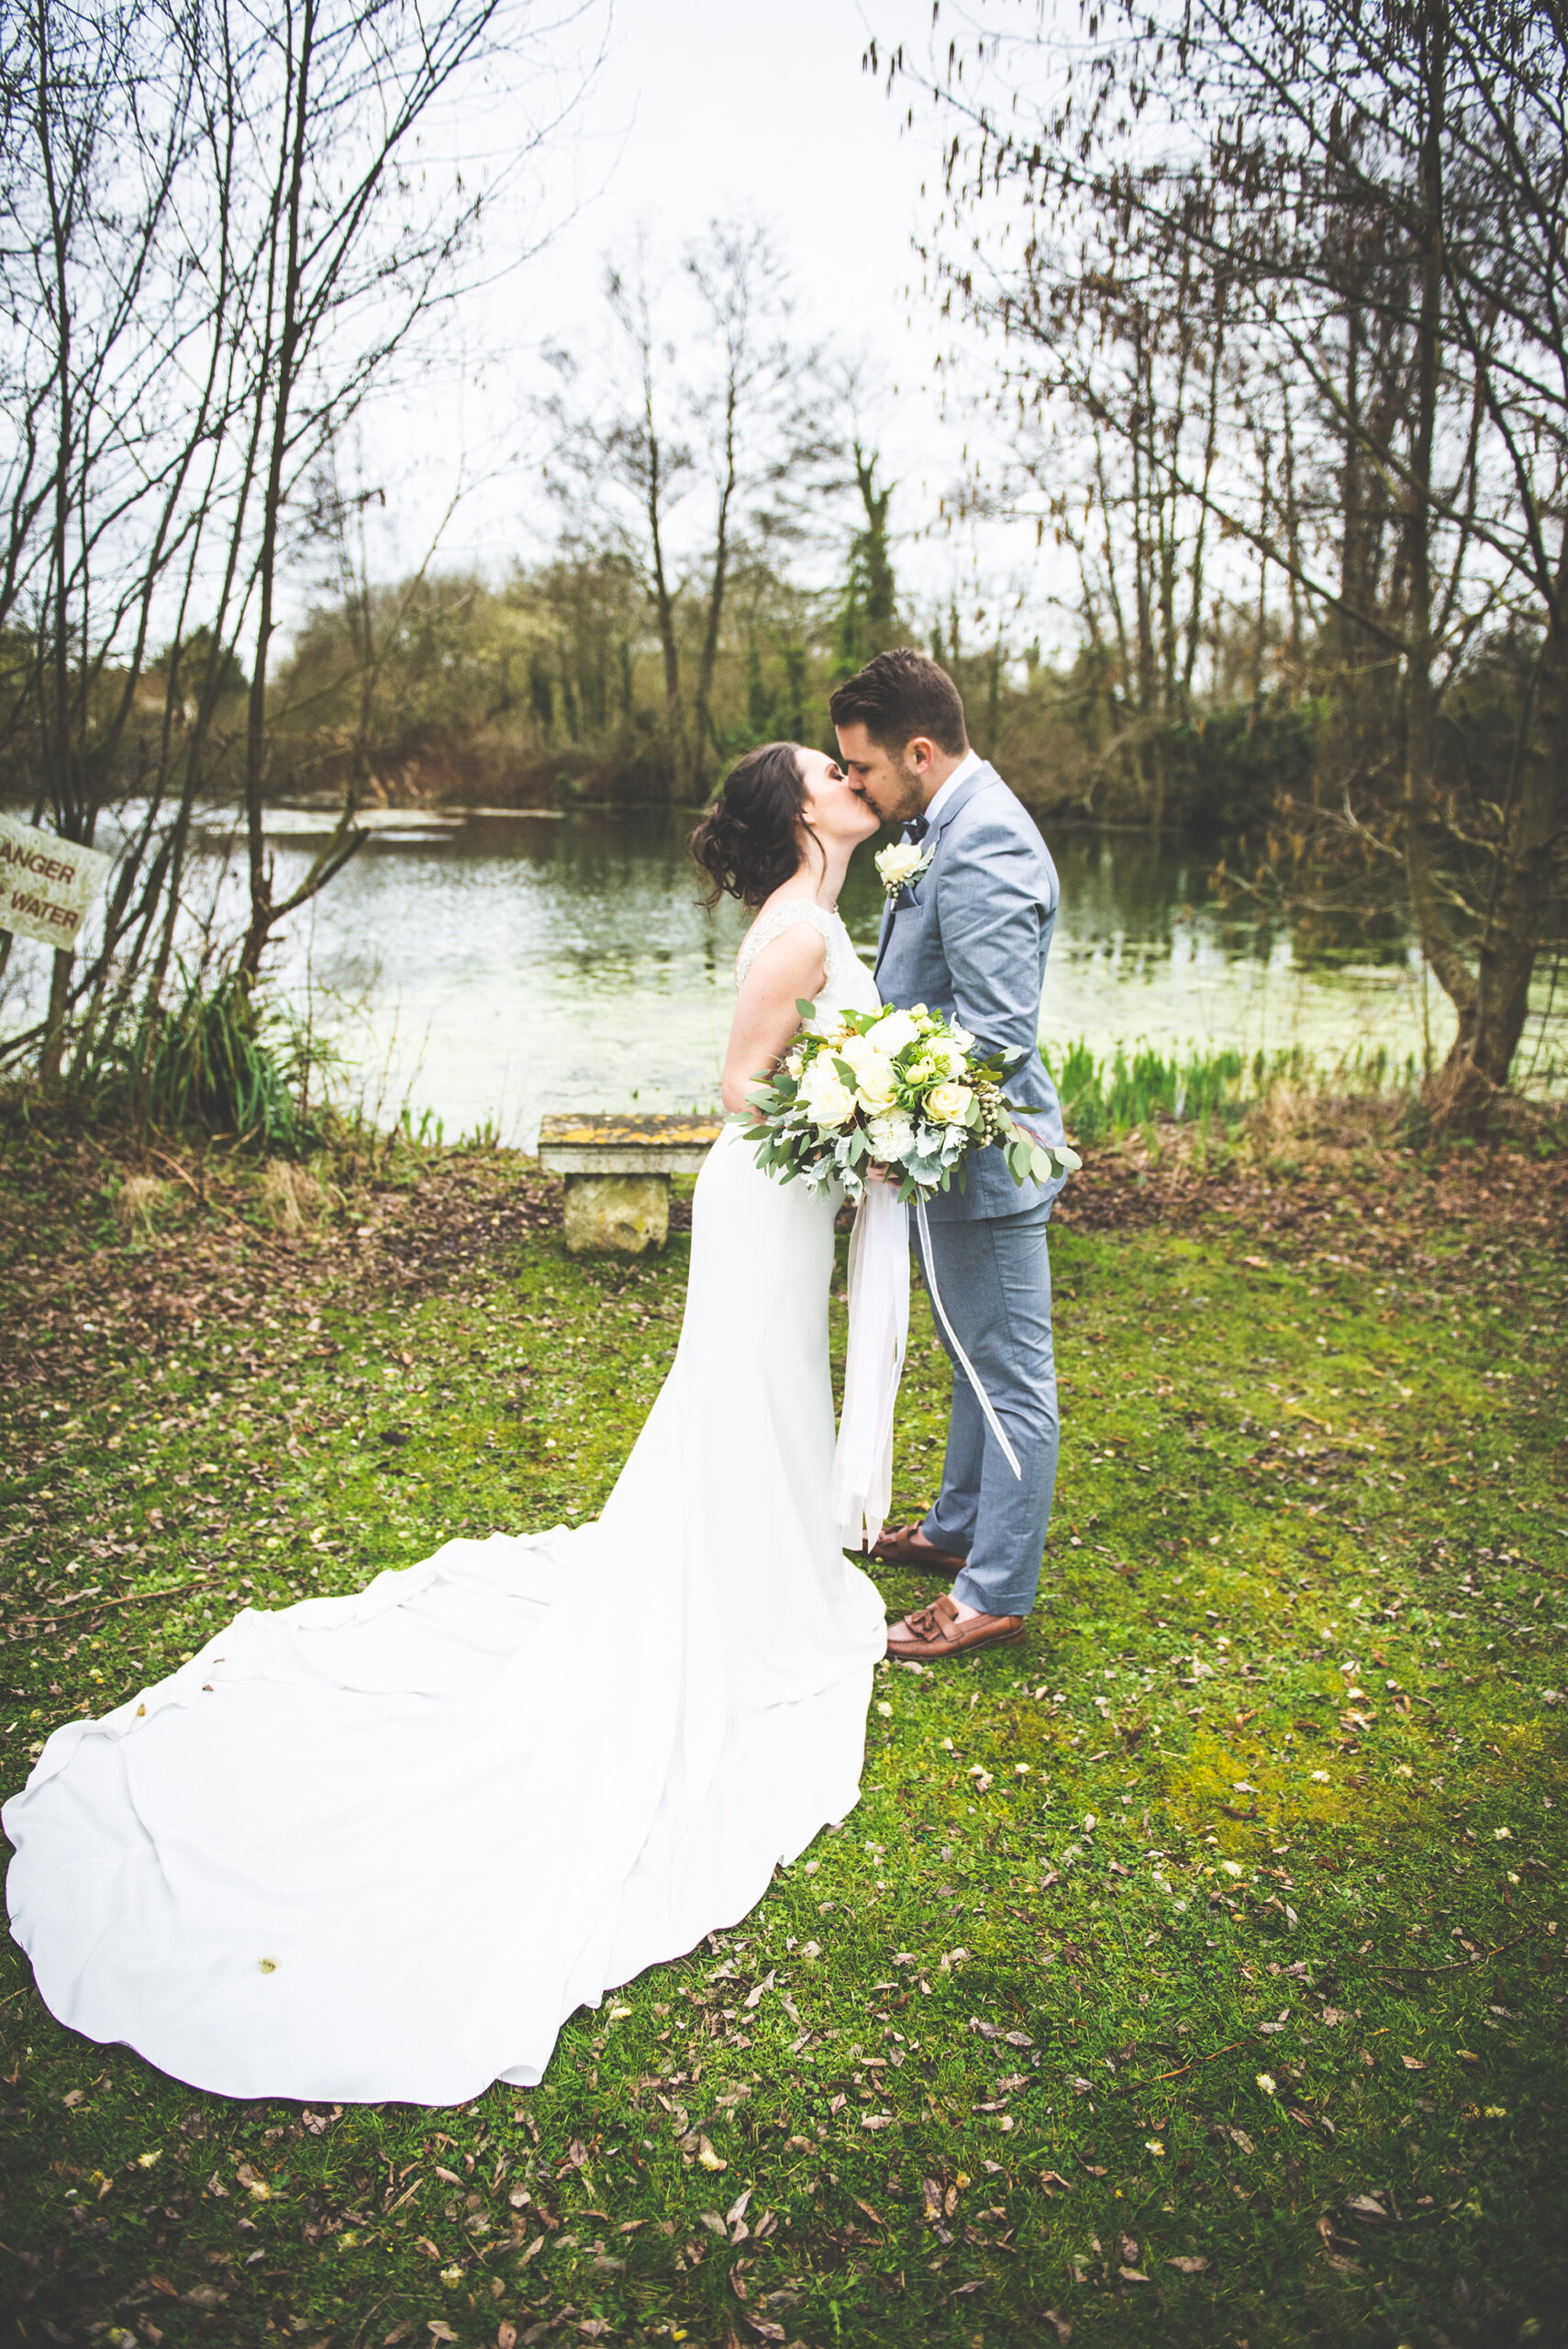 Rustic_Chic_Wedding_Inspiration-A_Knights_Tale_Photography_018